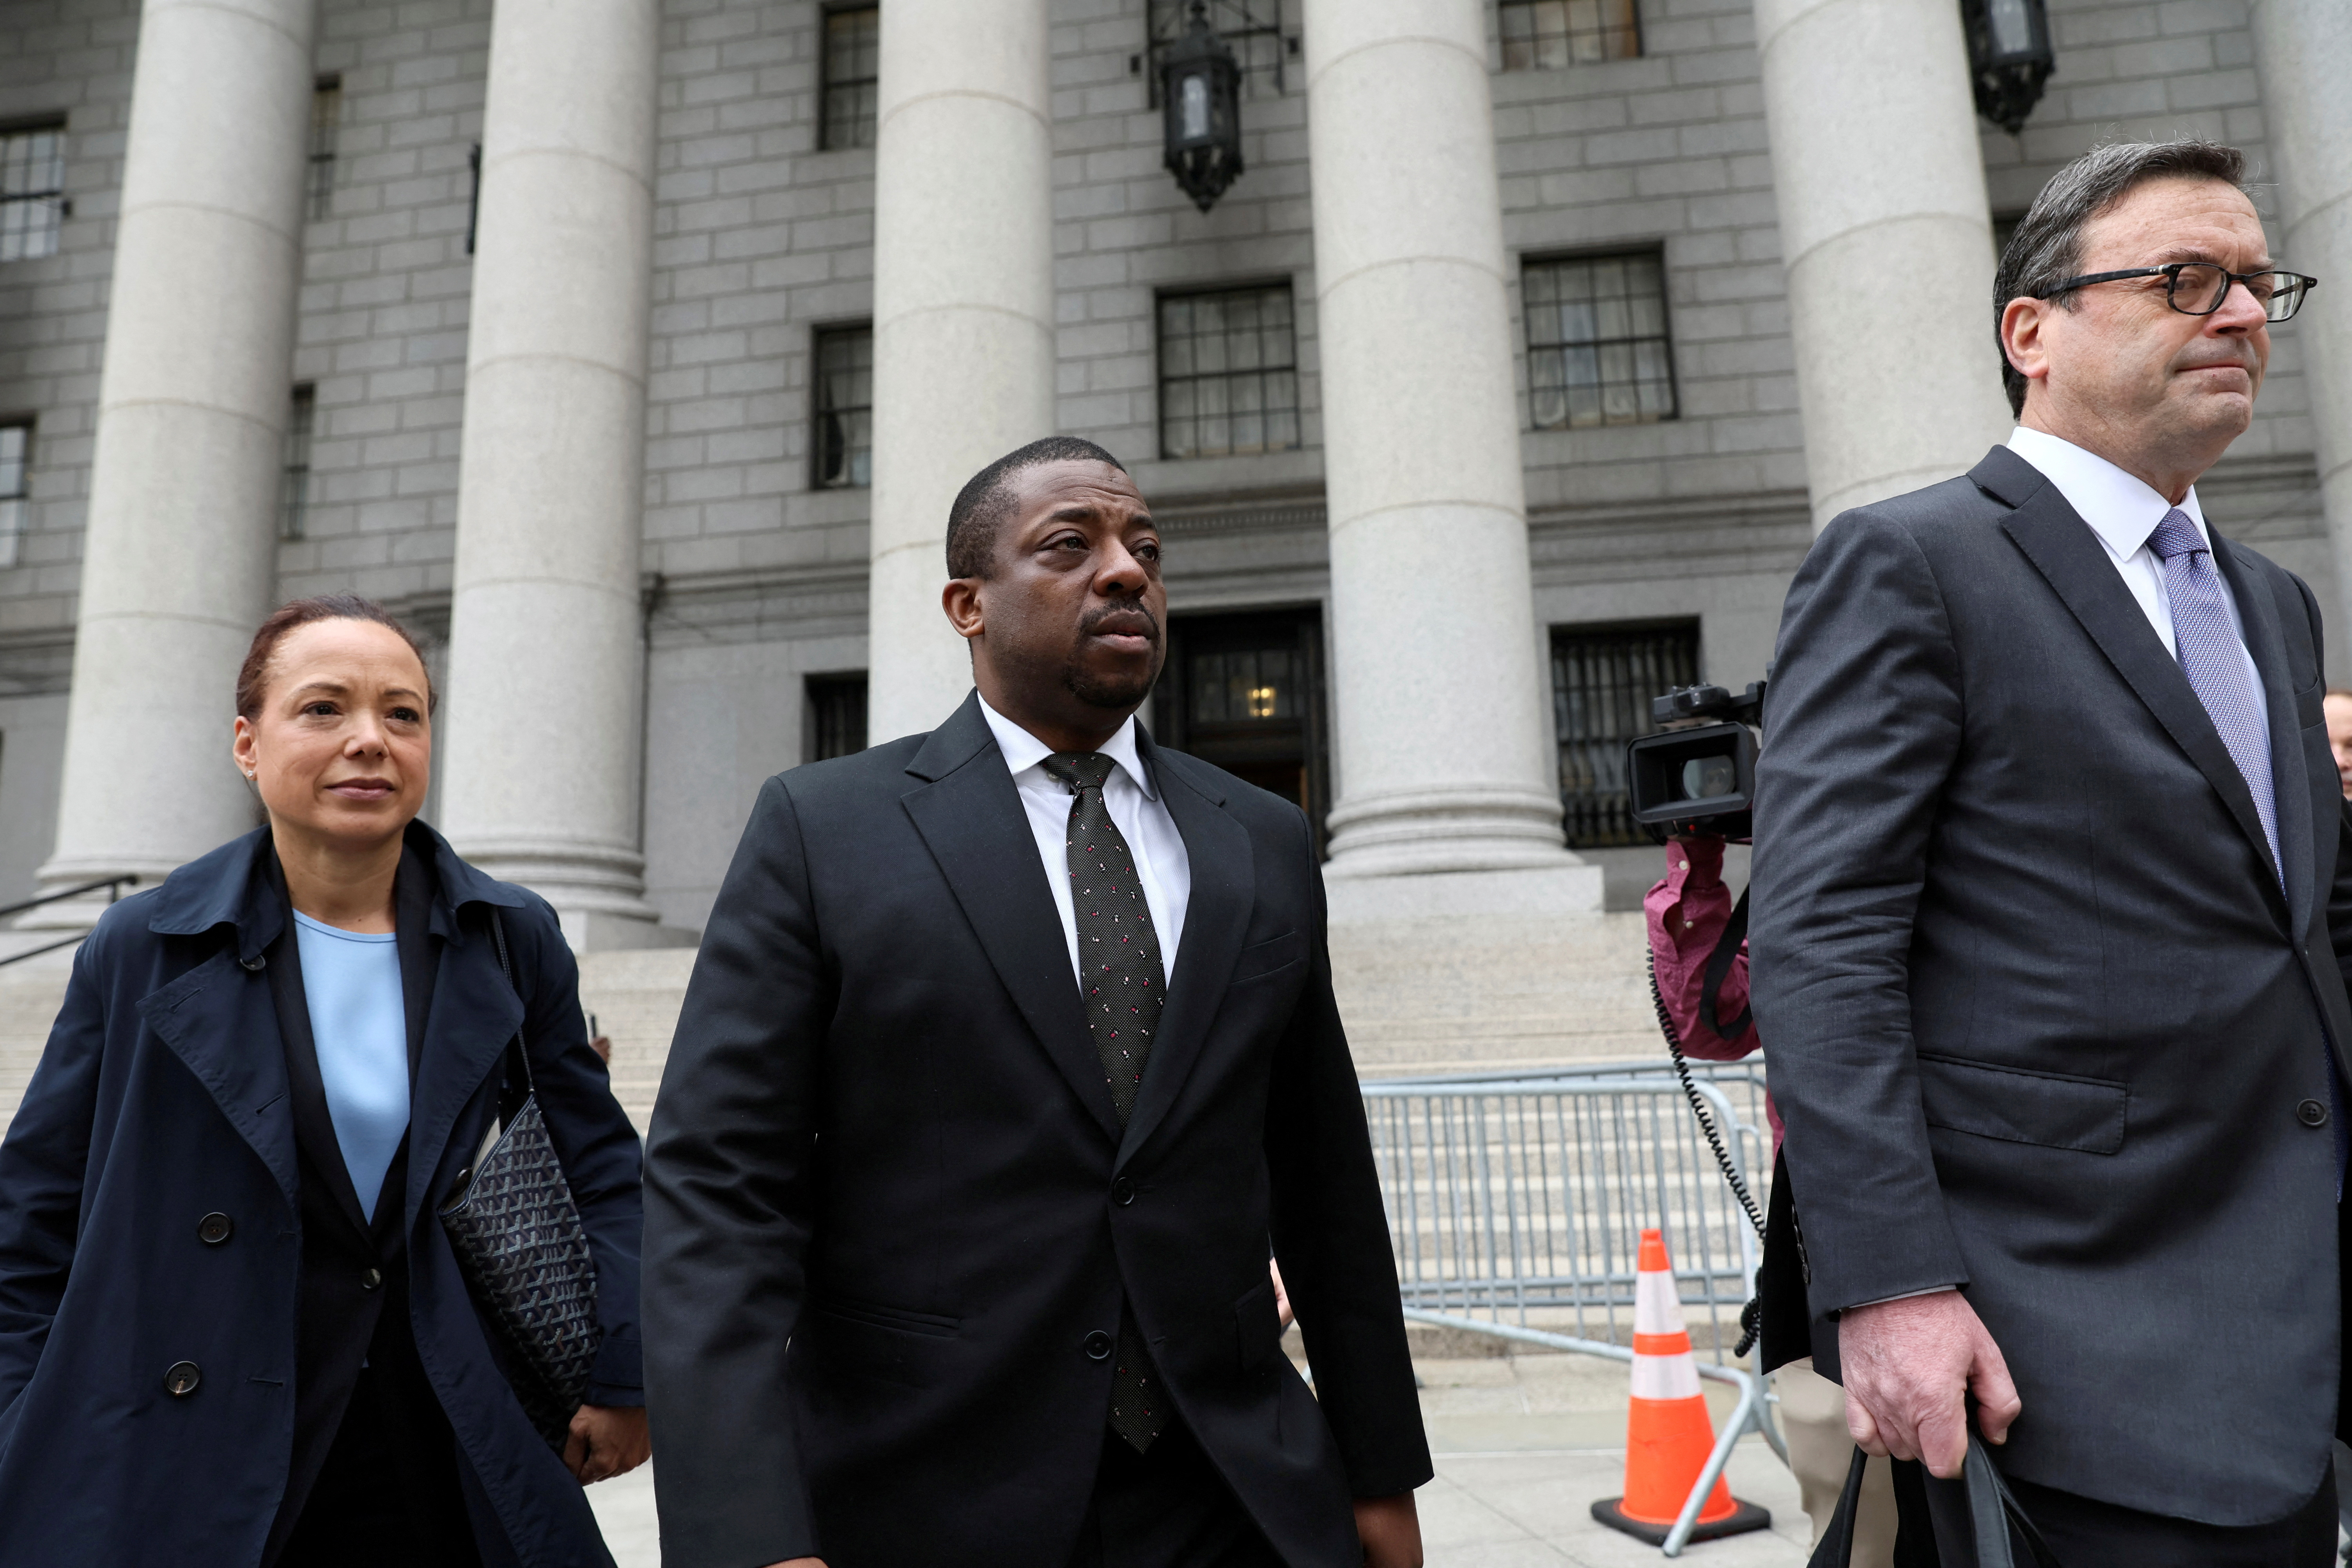 Former New York State Lieutenant Governor Brian Benjamin exits Manhattan federal courthouse in New York